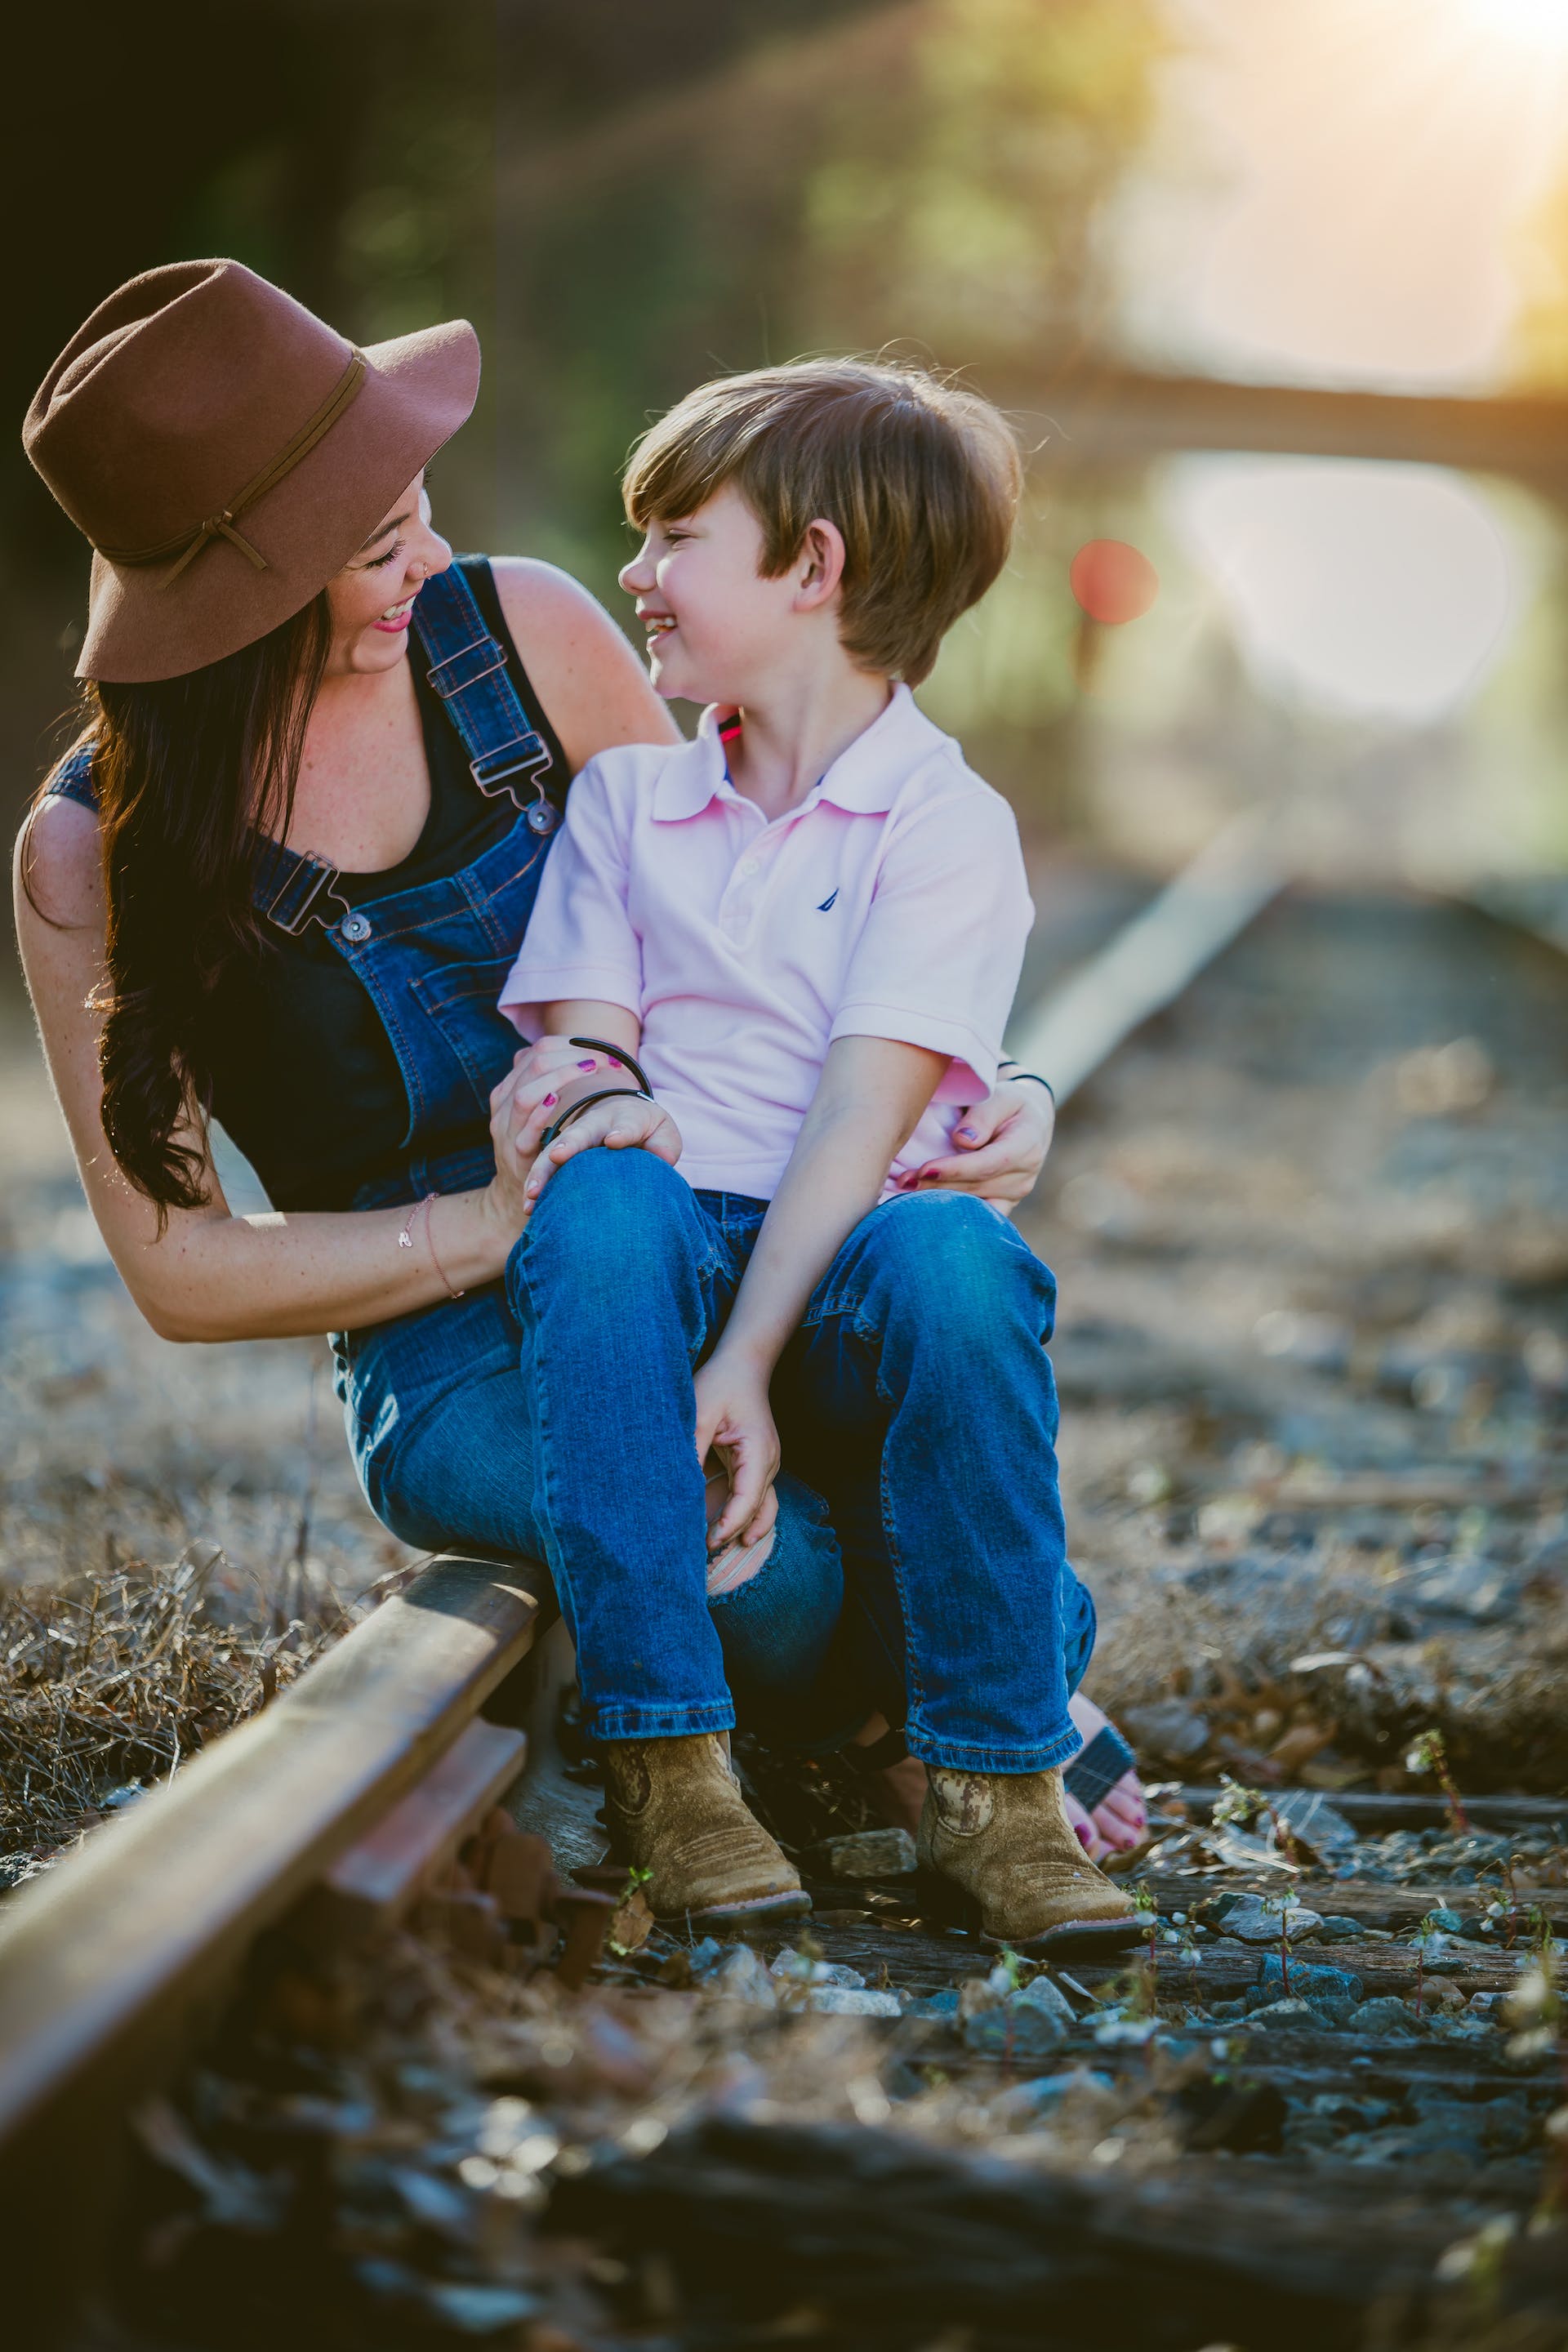 Mother and son sitting on a railway track | Source: Pexels